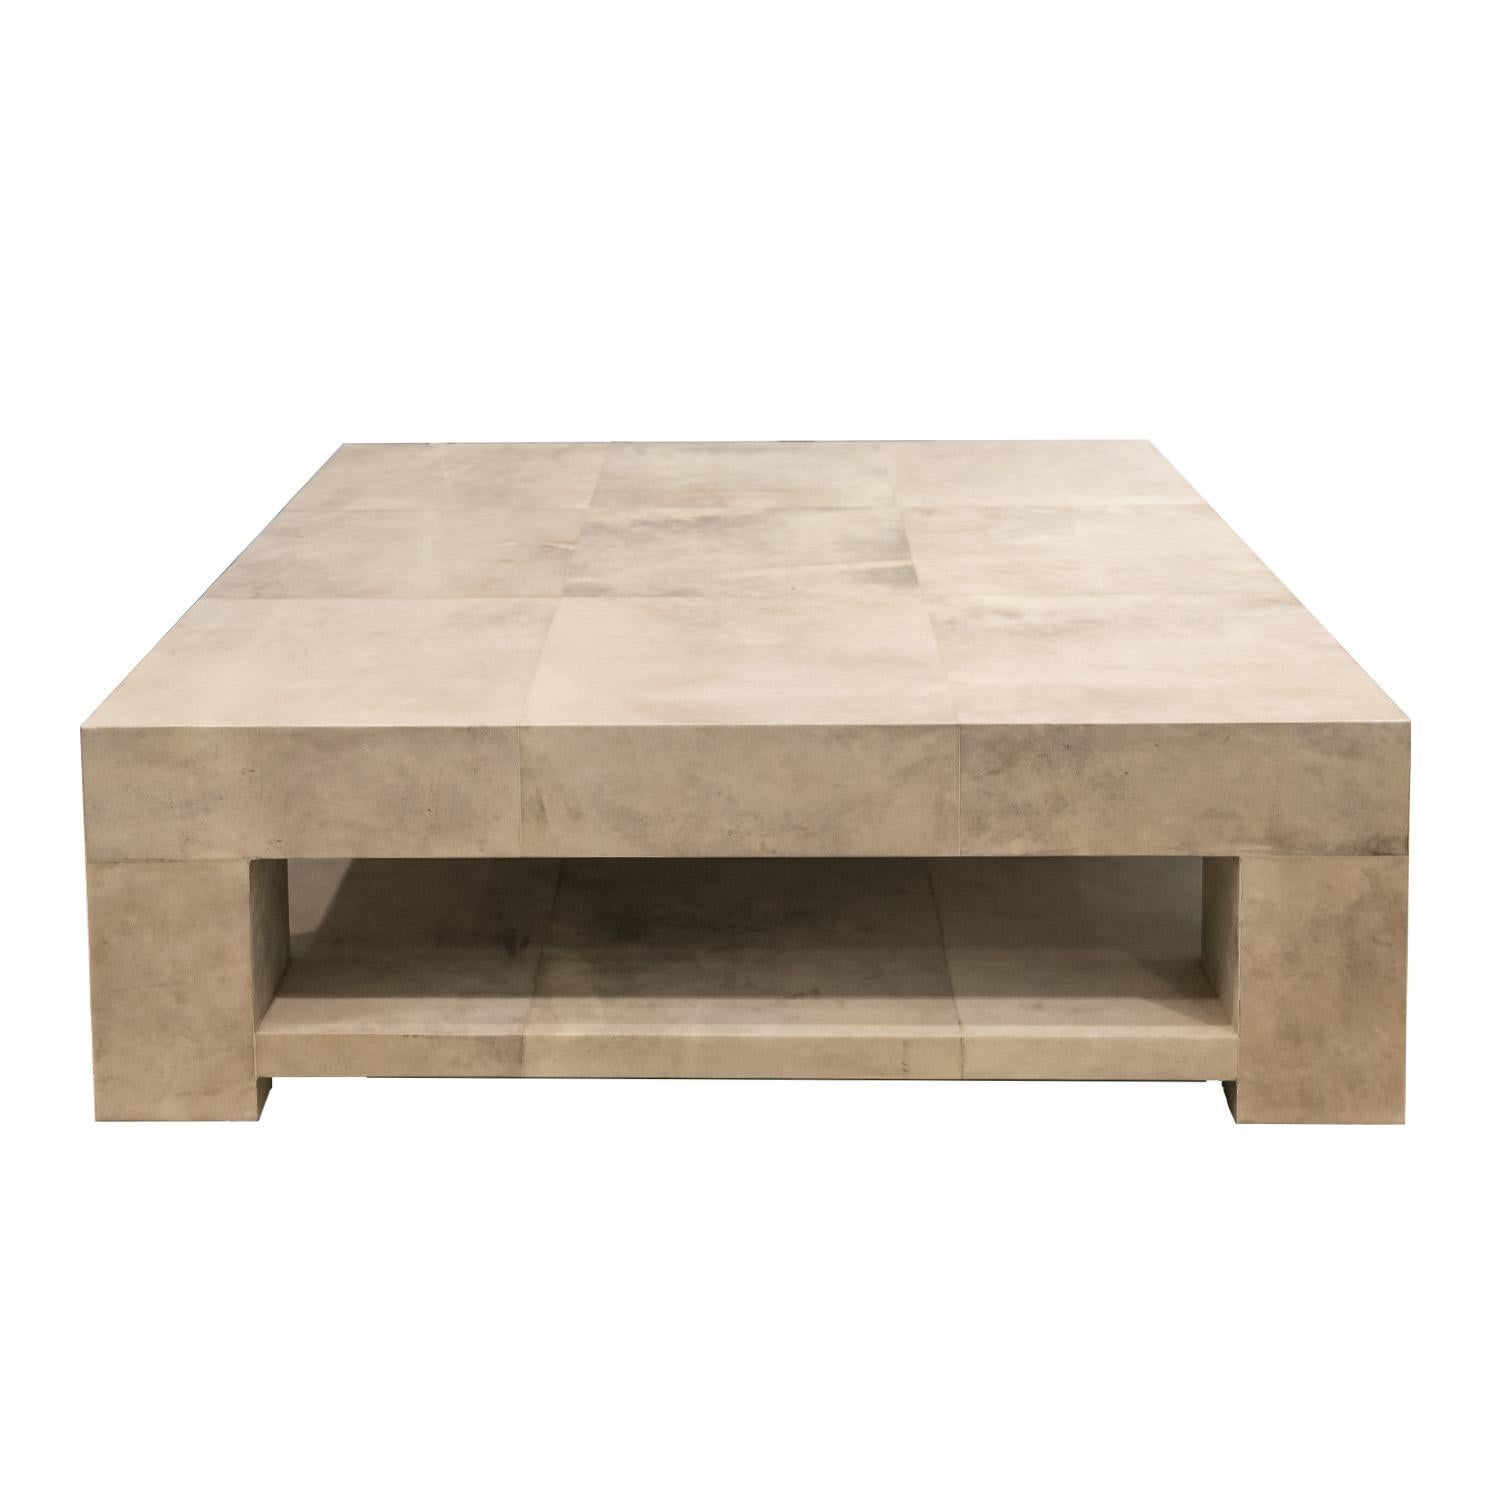 Custom 2-tier coffee table model 1020 in lacquered goatskin with square panels on top, satin or high gloss finish, by Evan Lobel for Lobel Originals. This artisan coffee table is made to the highest quality standards. Can be made in any size. The